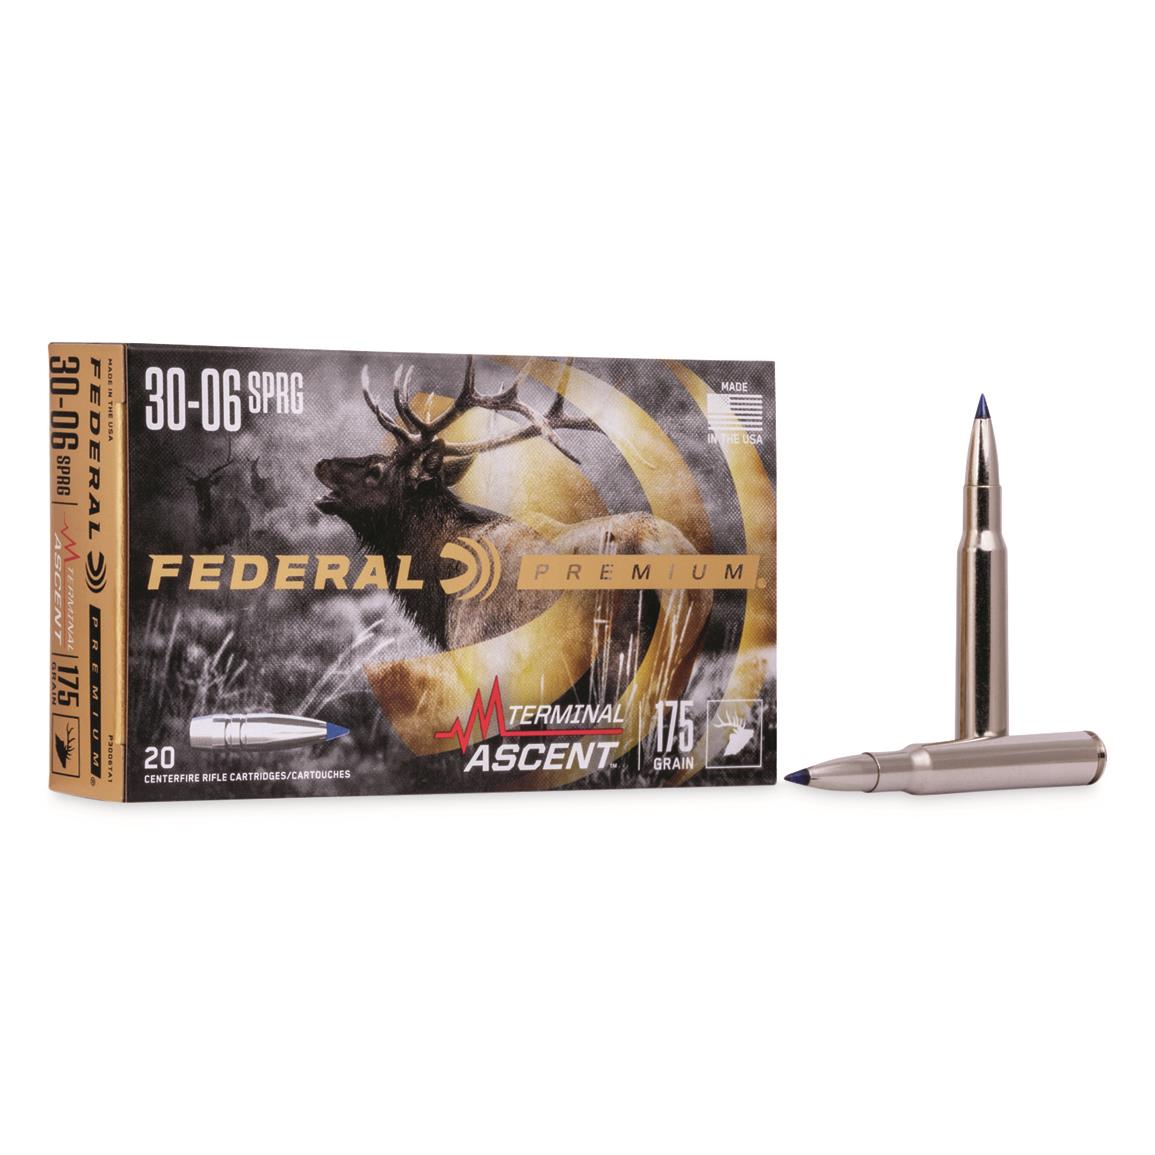 Federal Premium Terminal Ascent, .30-06 Spr., Bonded Polymer Tip, 175 Grain, 20 Rounds